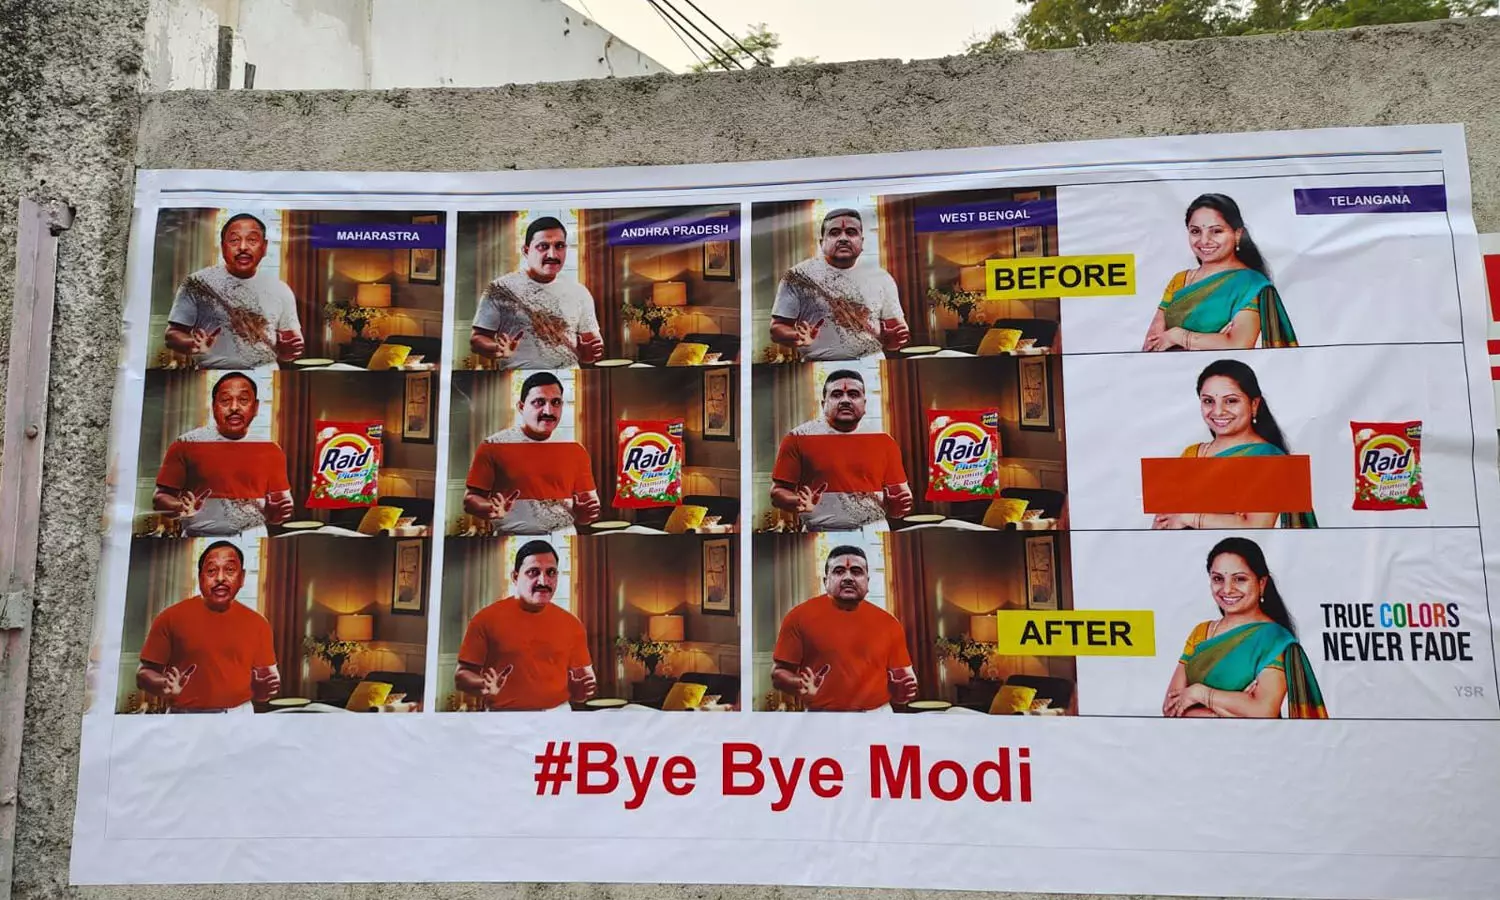 Ahead of Kavithas ED inquiry, ‘Bye-bye Modi’ posters sprung up in Hyderabad